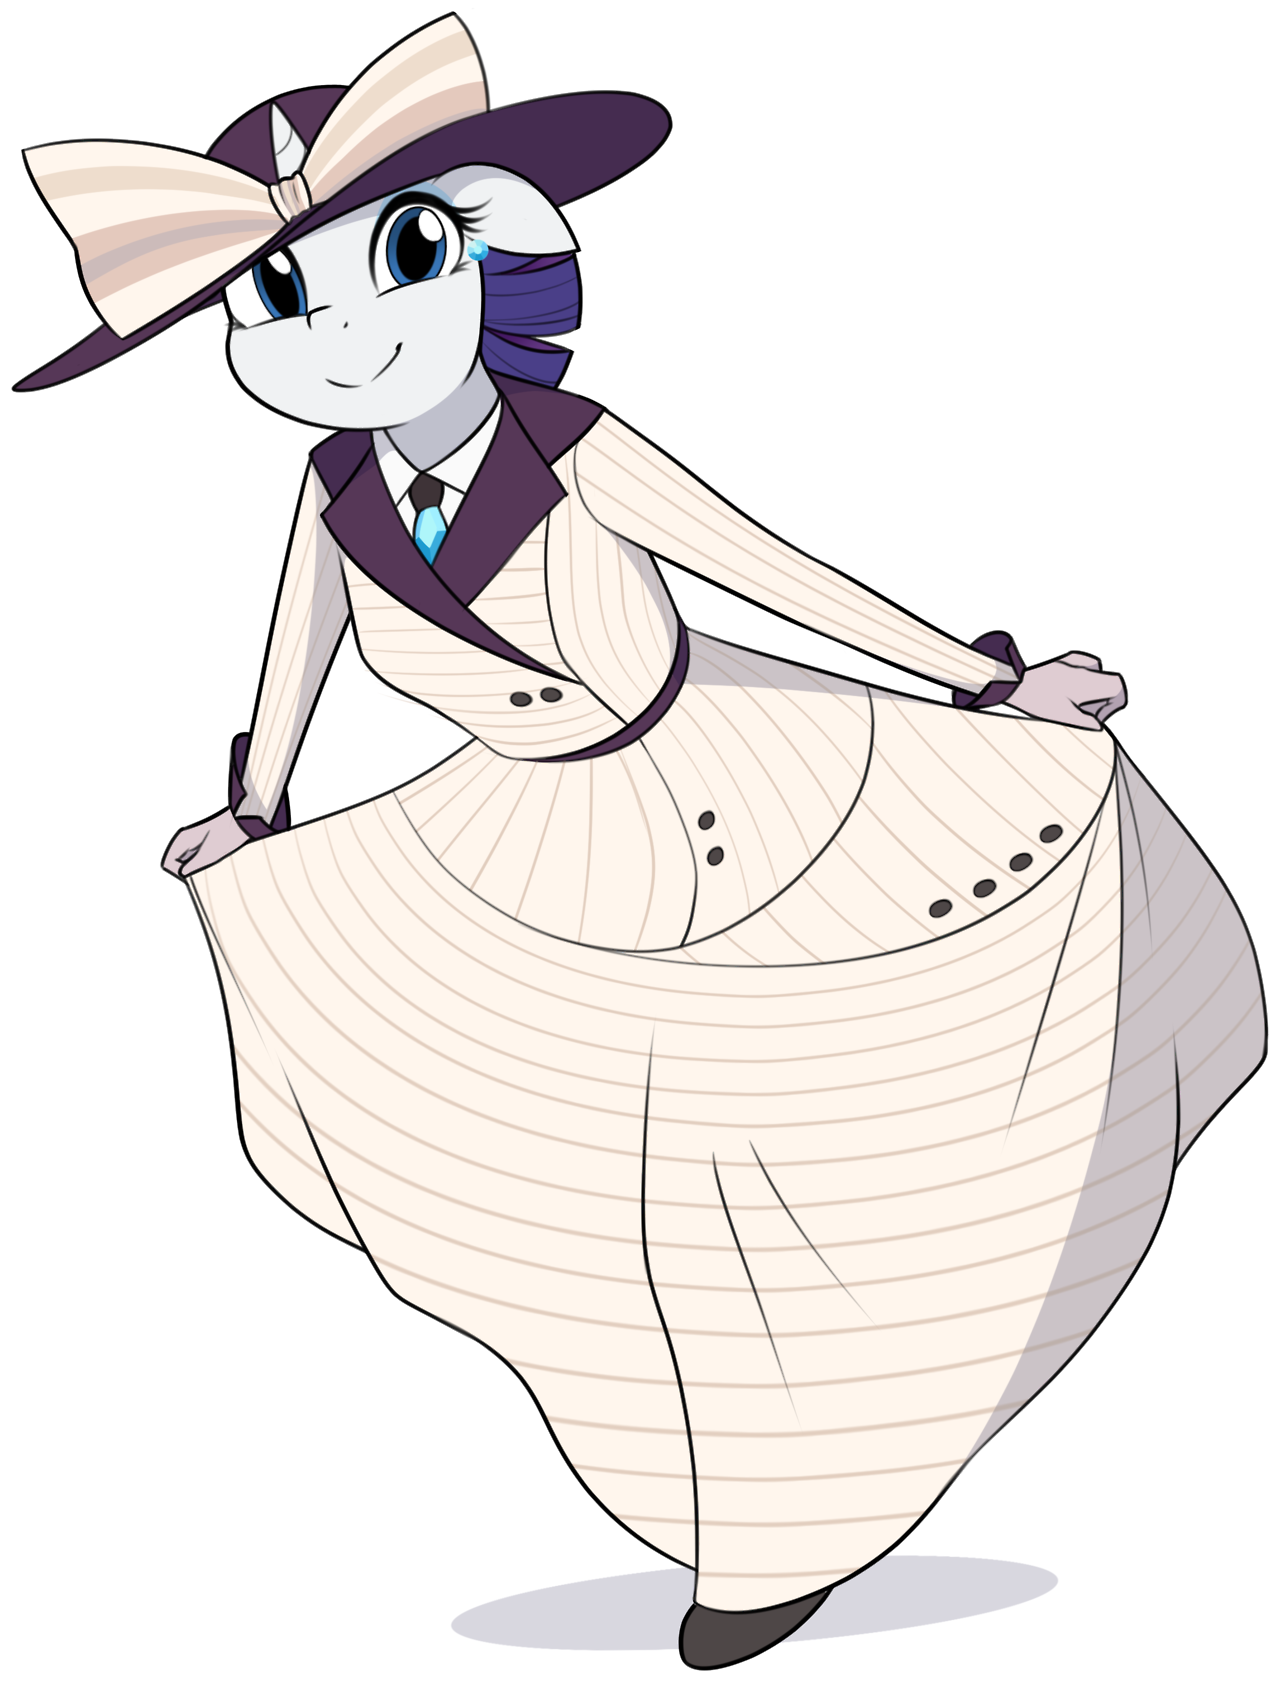 1429380__safe_artist-colon-furrgroup_rarity_ppov_spoiler-colon-s06e22_anthro_clothes_commission_costume_curtsey_cute_dress_looking+at+you_pose_raristoc.png